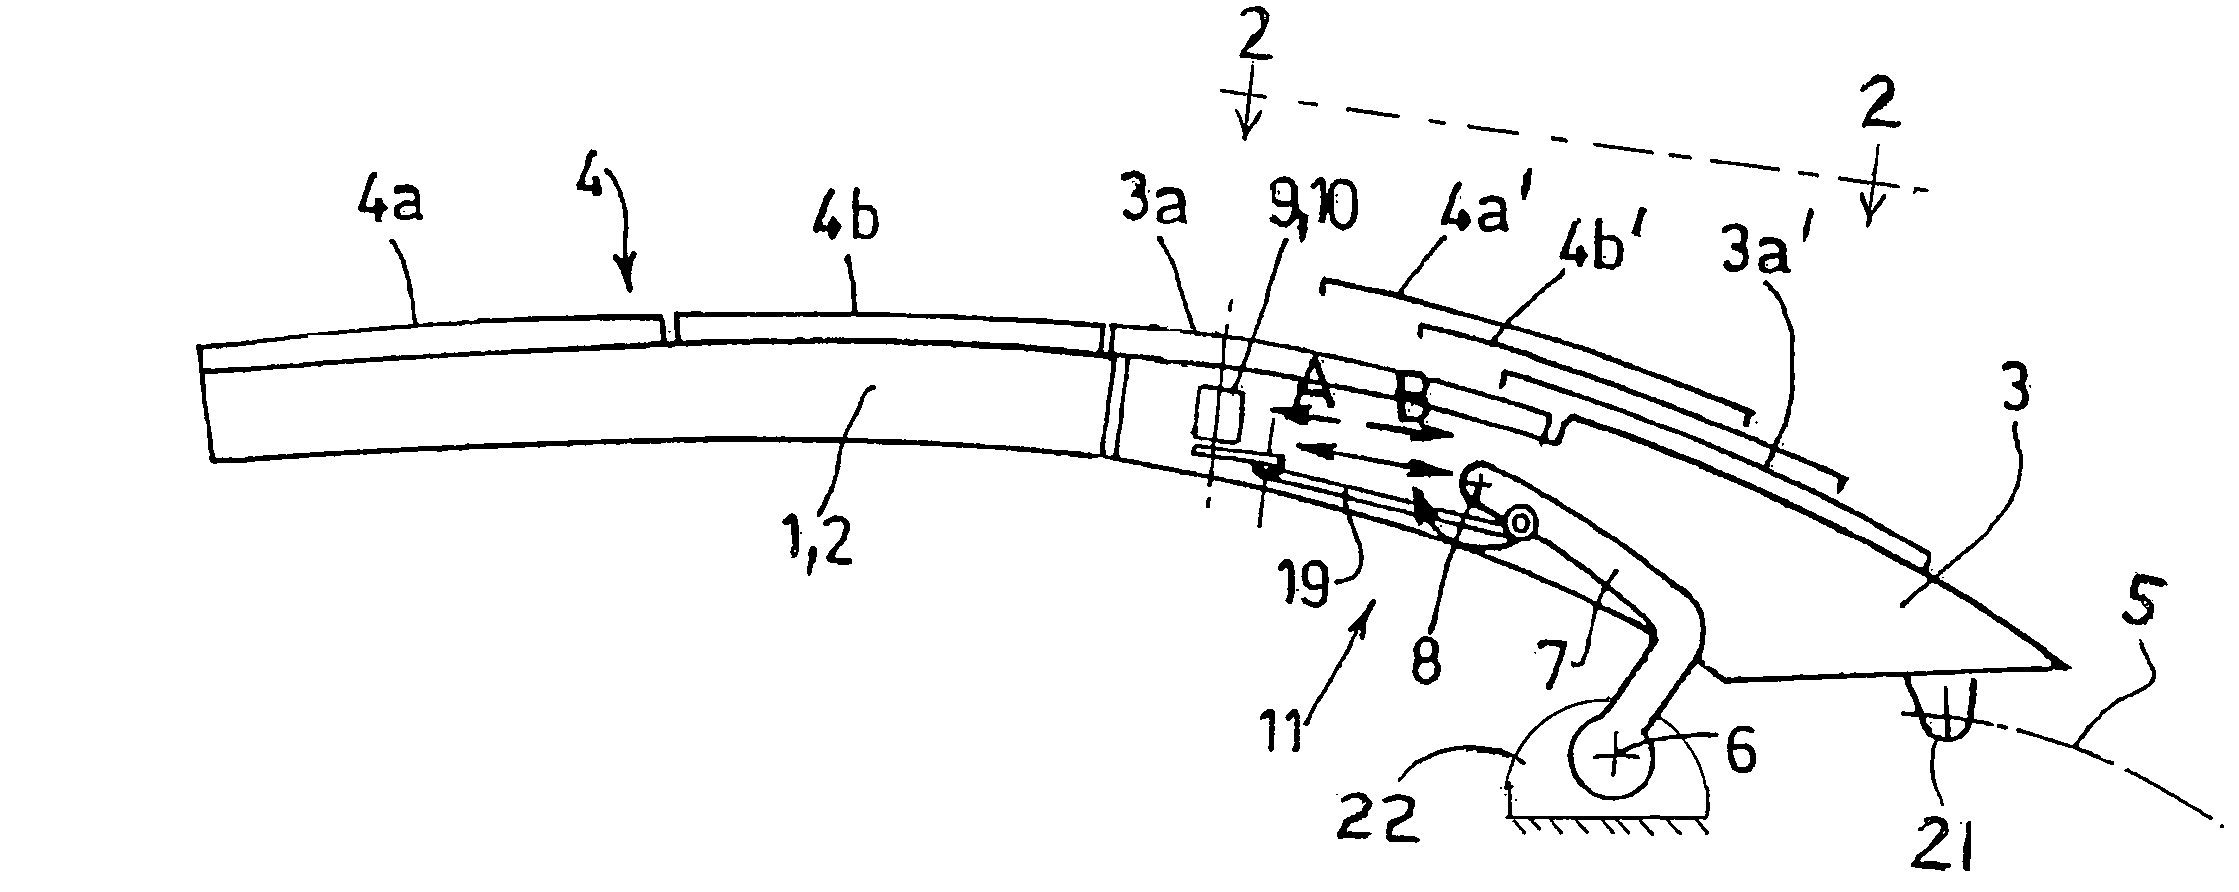 Retractable roof for a vehicle comprising a transmitting movement device